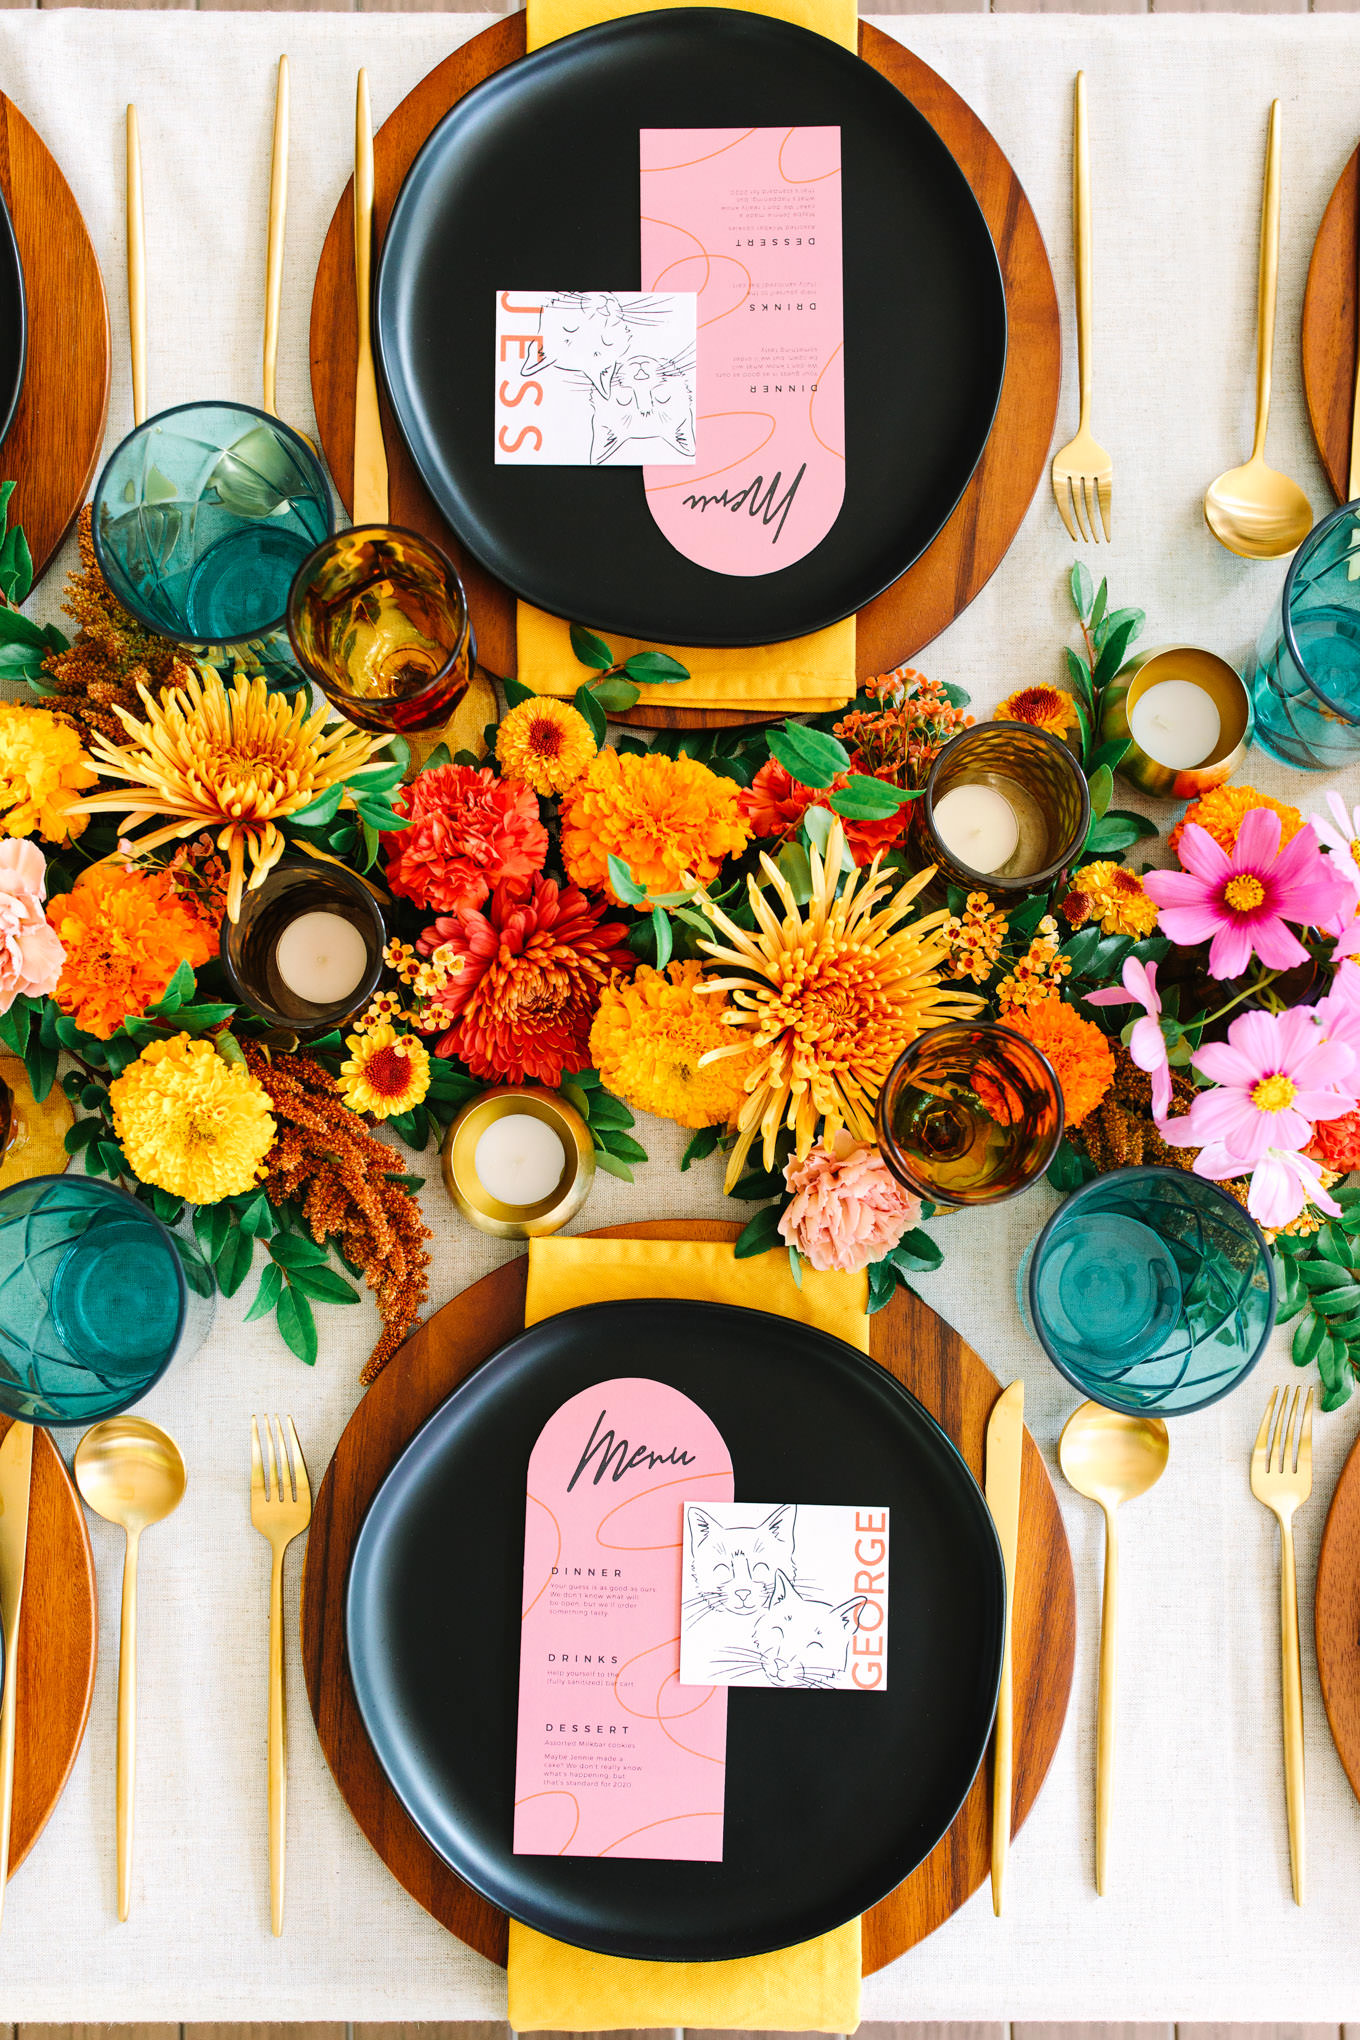 Backyard wedding reception table with paper goods by Megan Roy | Engagement, elopement, and wedding photography roundup of Mary Costa’s favorite images from 2020 | Colorful and elevated photography for fun-loving couples in Southern California | #2020wedding #elopement #weddingphoto #weddingphotography #microwedding   Source: Mary Costa Photography | Los Angeles